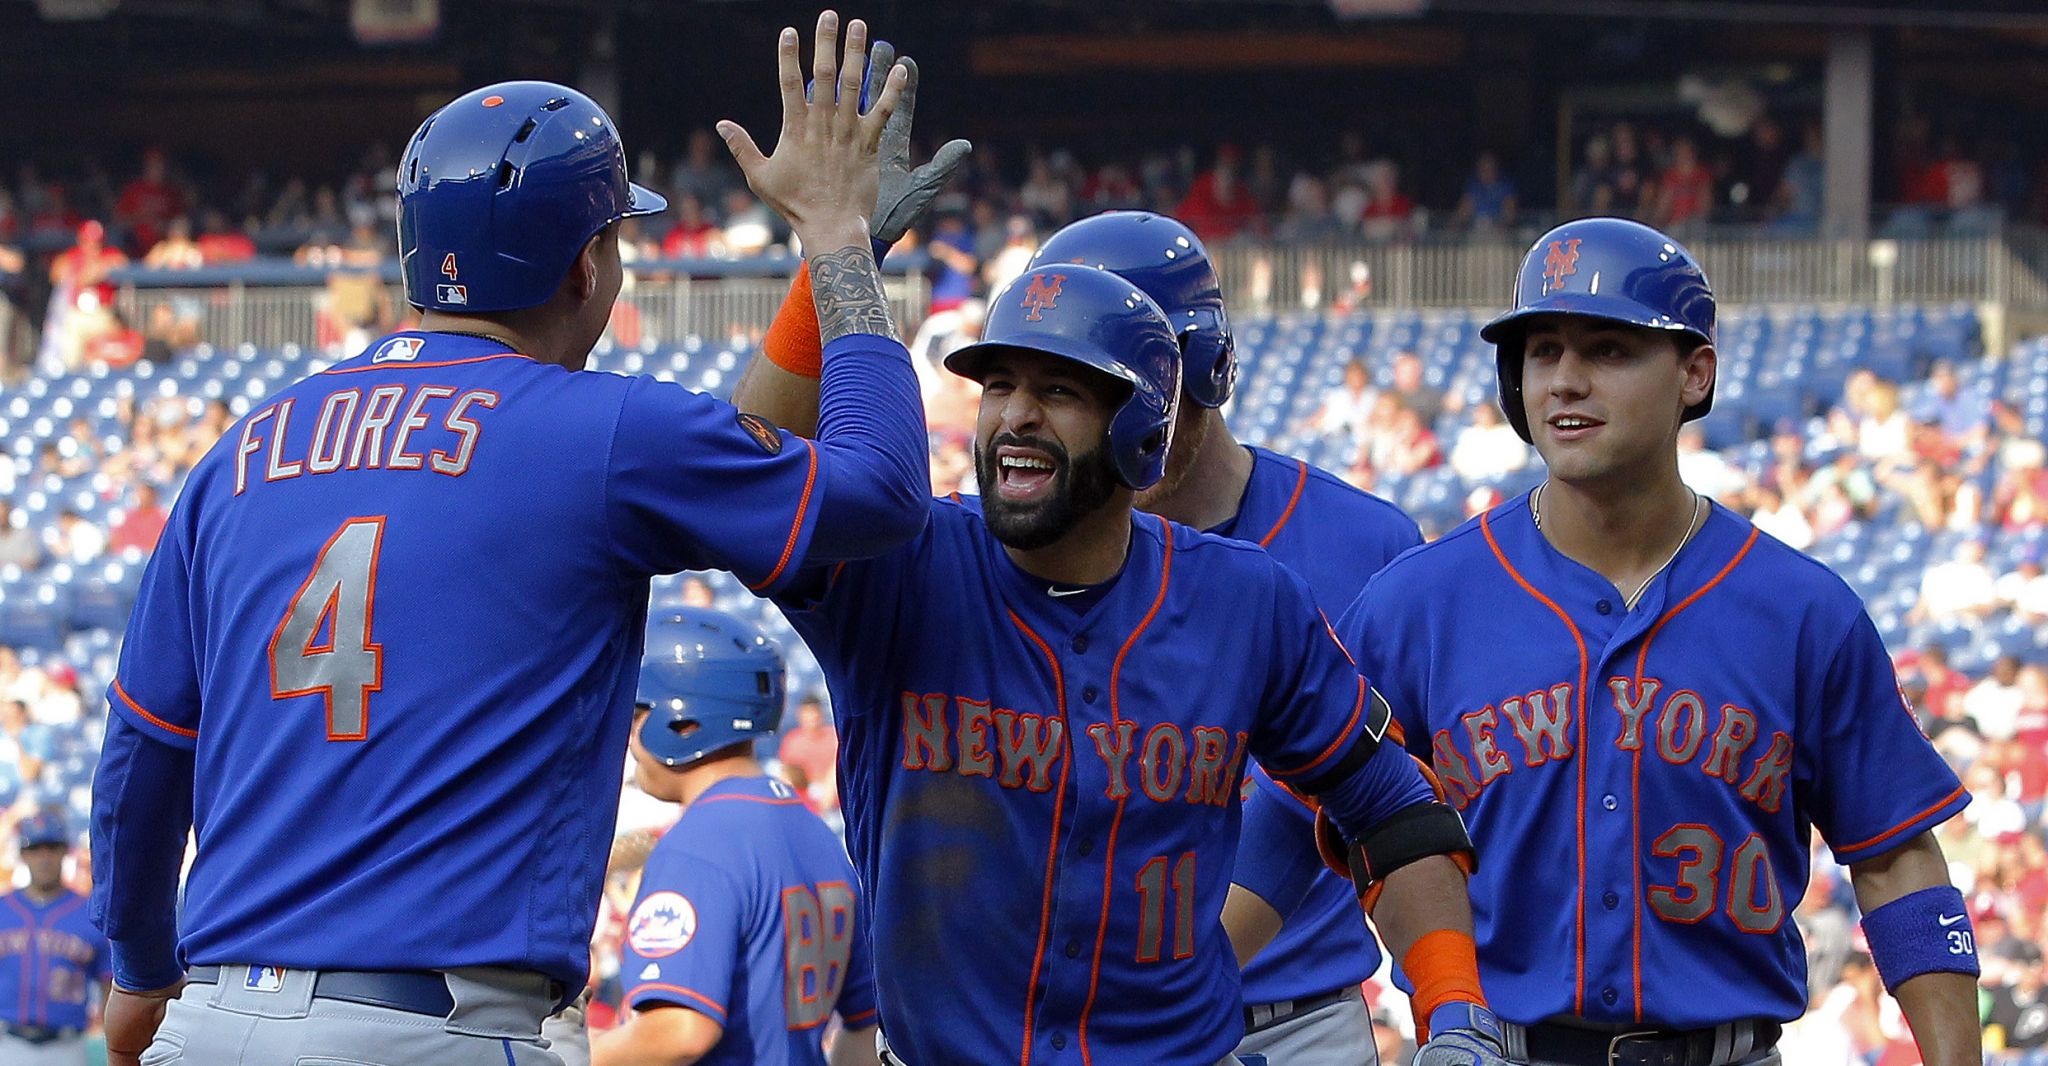 PHILADELPHIA (AP) — The New York Mets didn't care who was on the mound...